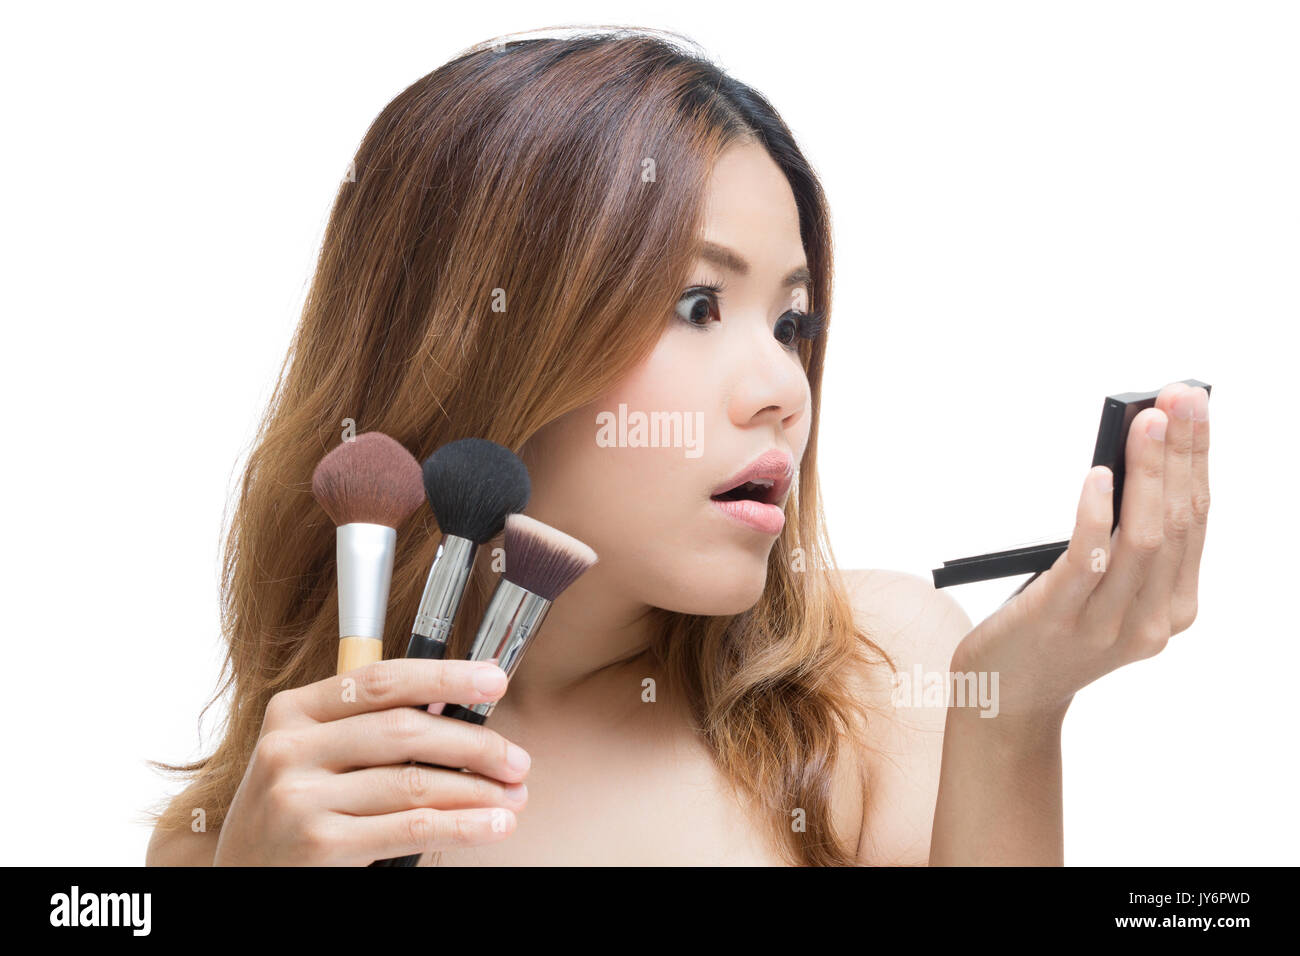 shocked face woman with hand holding make up brush and palette Stock Photo